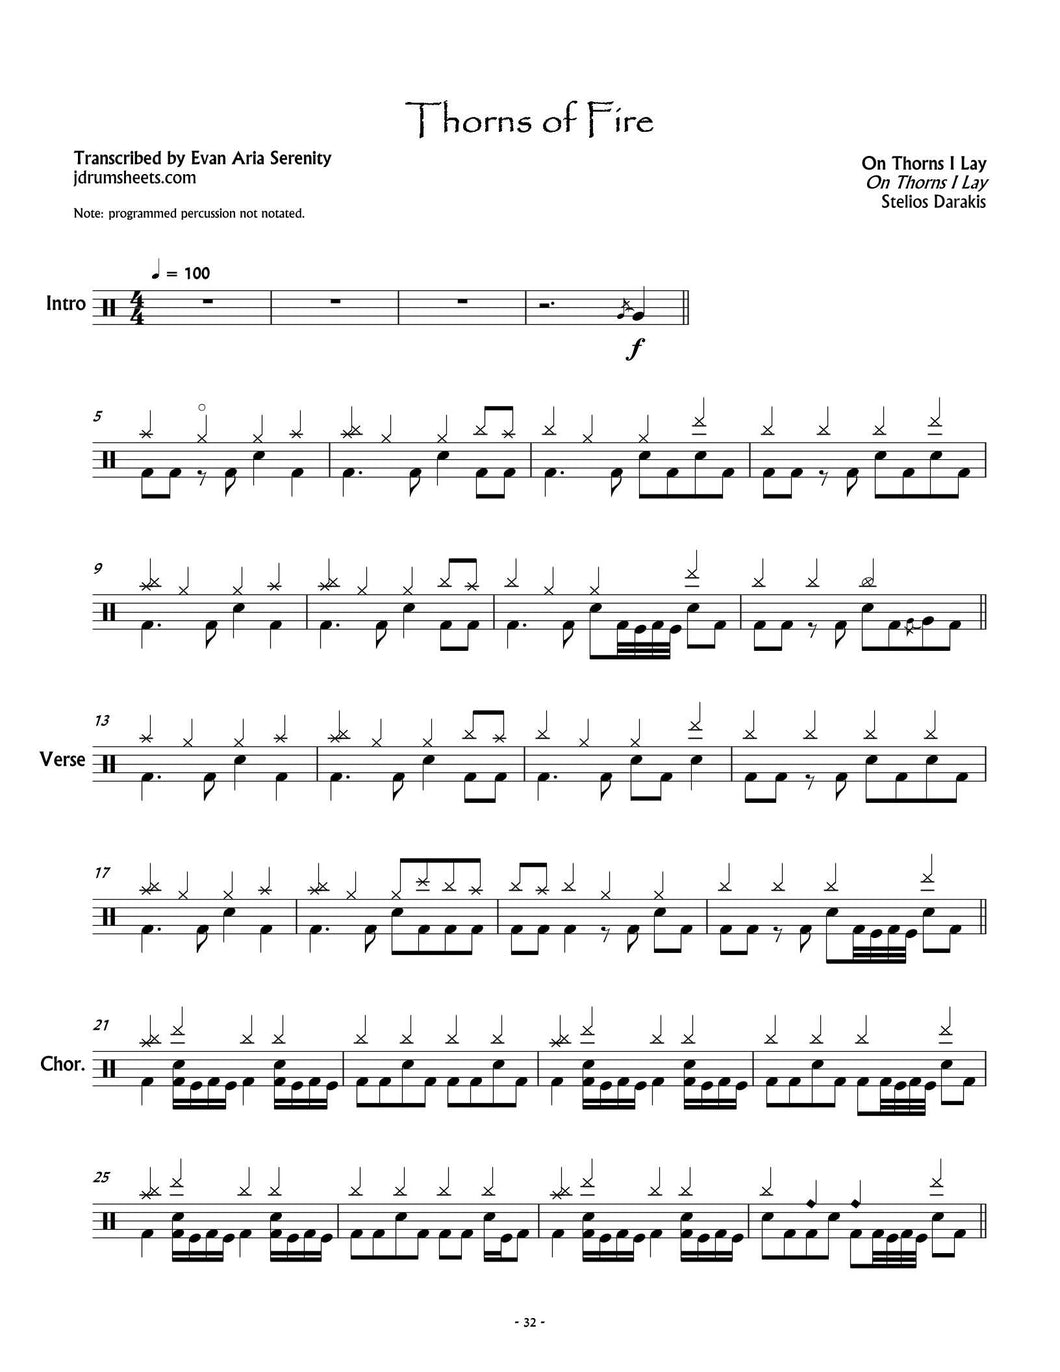 Thorns of Fire - On Thorns I Lay - Full Drum Transcription / Drum Sheet Music - Jaslow Drum Sheets